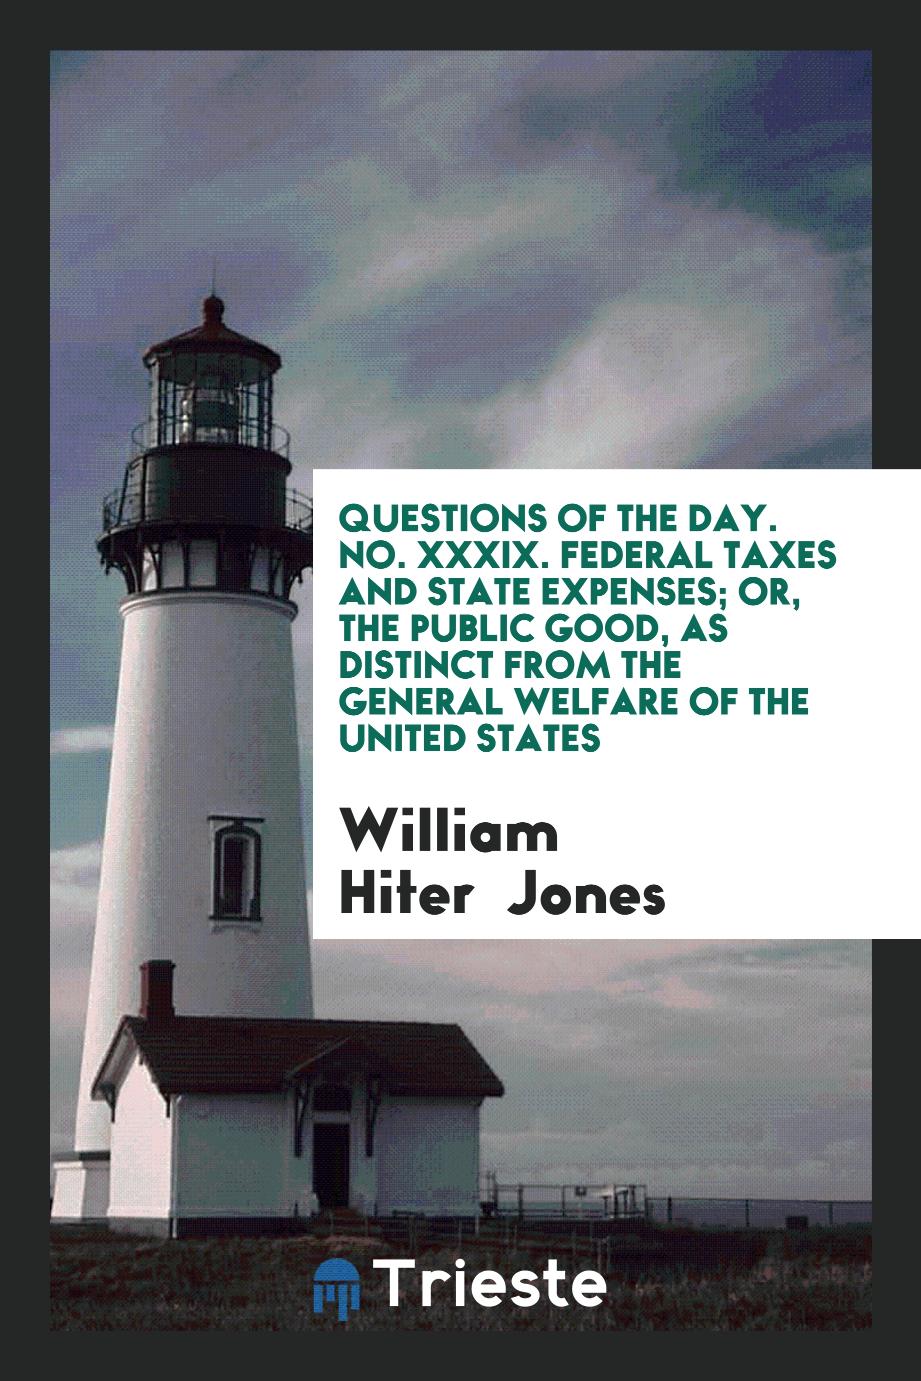 William Hiter  Jones - Questions of the Day. No. XXXIX. Federal Taxes and State Expenses; Or, the Public Good, as Distinct from the General Welfare of the United States